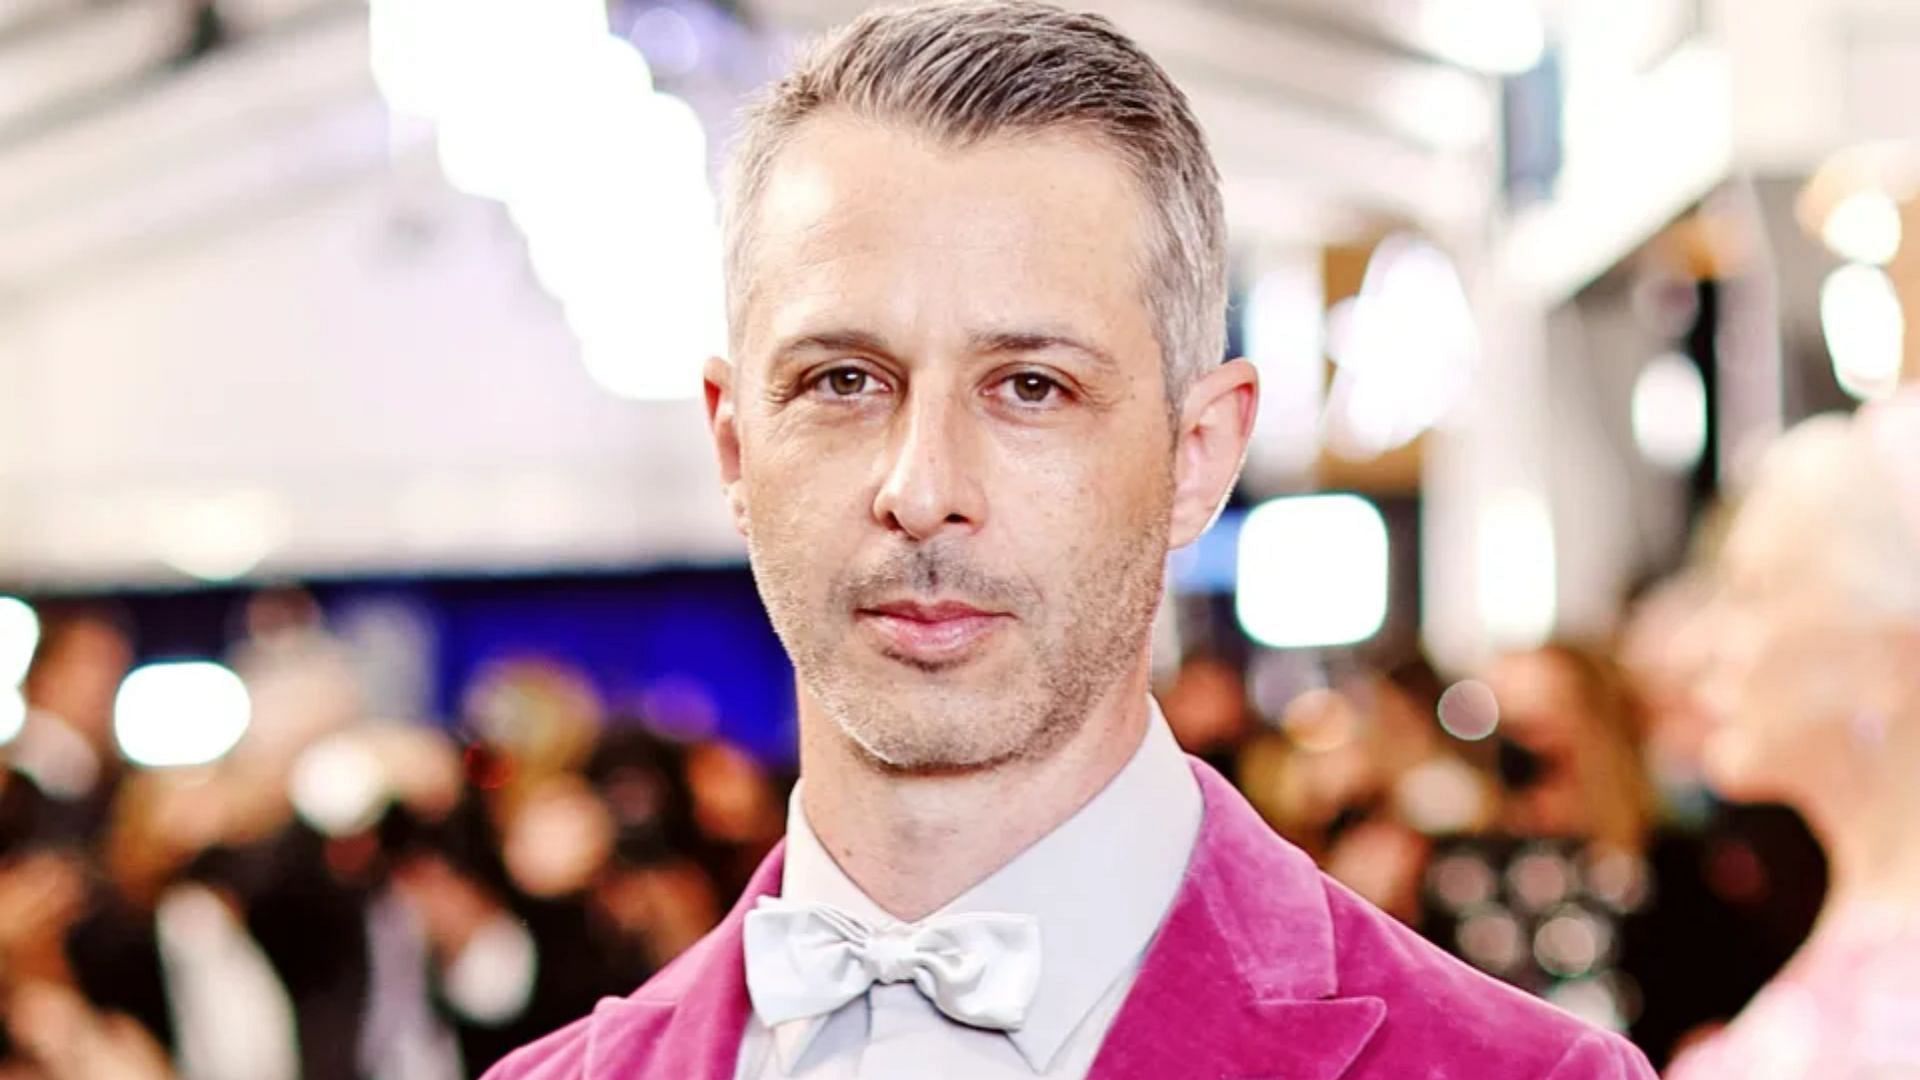 Jeremy Strong comments on his New Yorker profile. (Image via Dimitrios Kambouris/Getty Images)